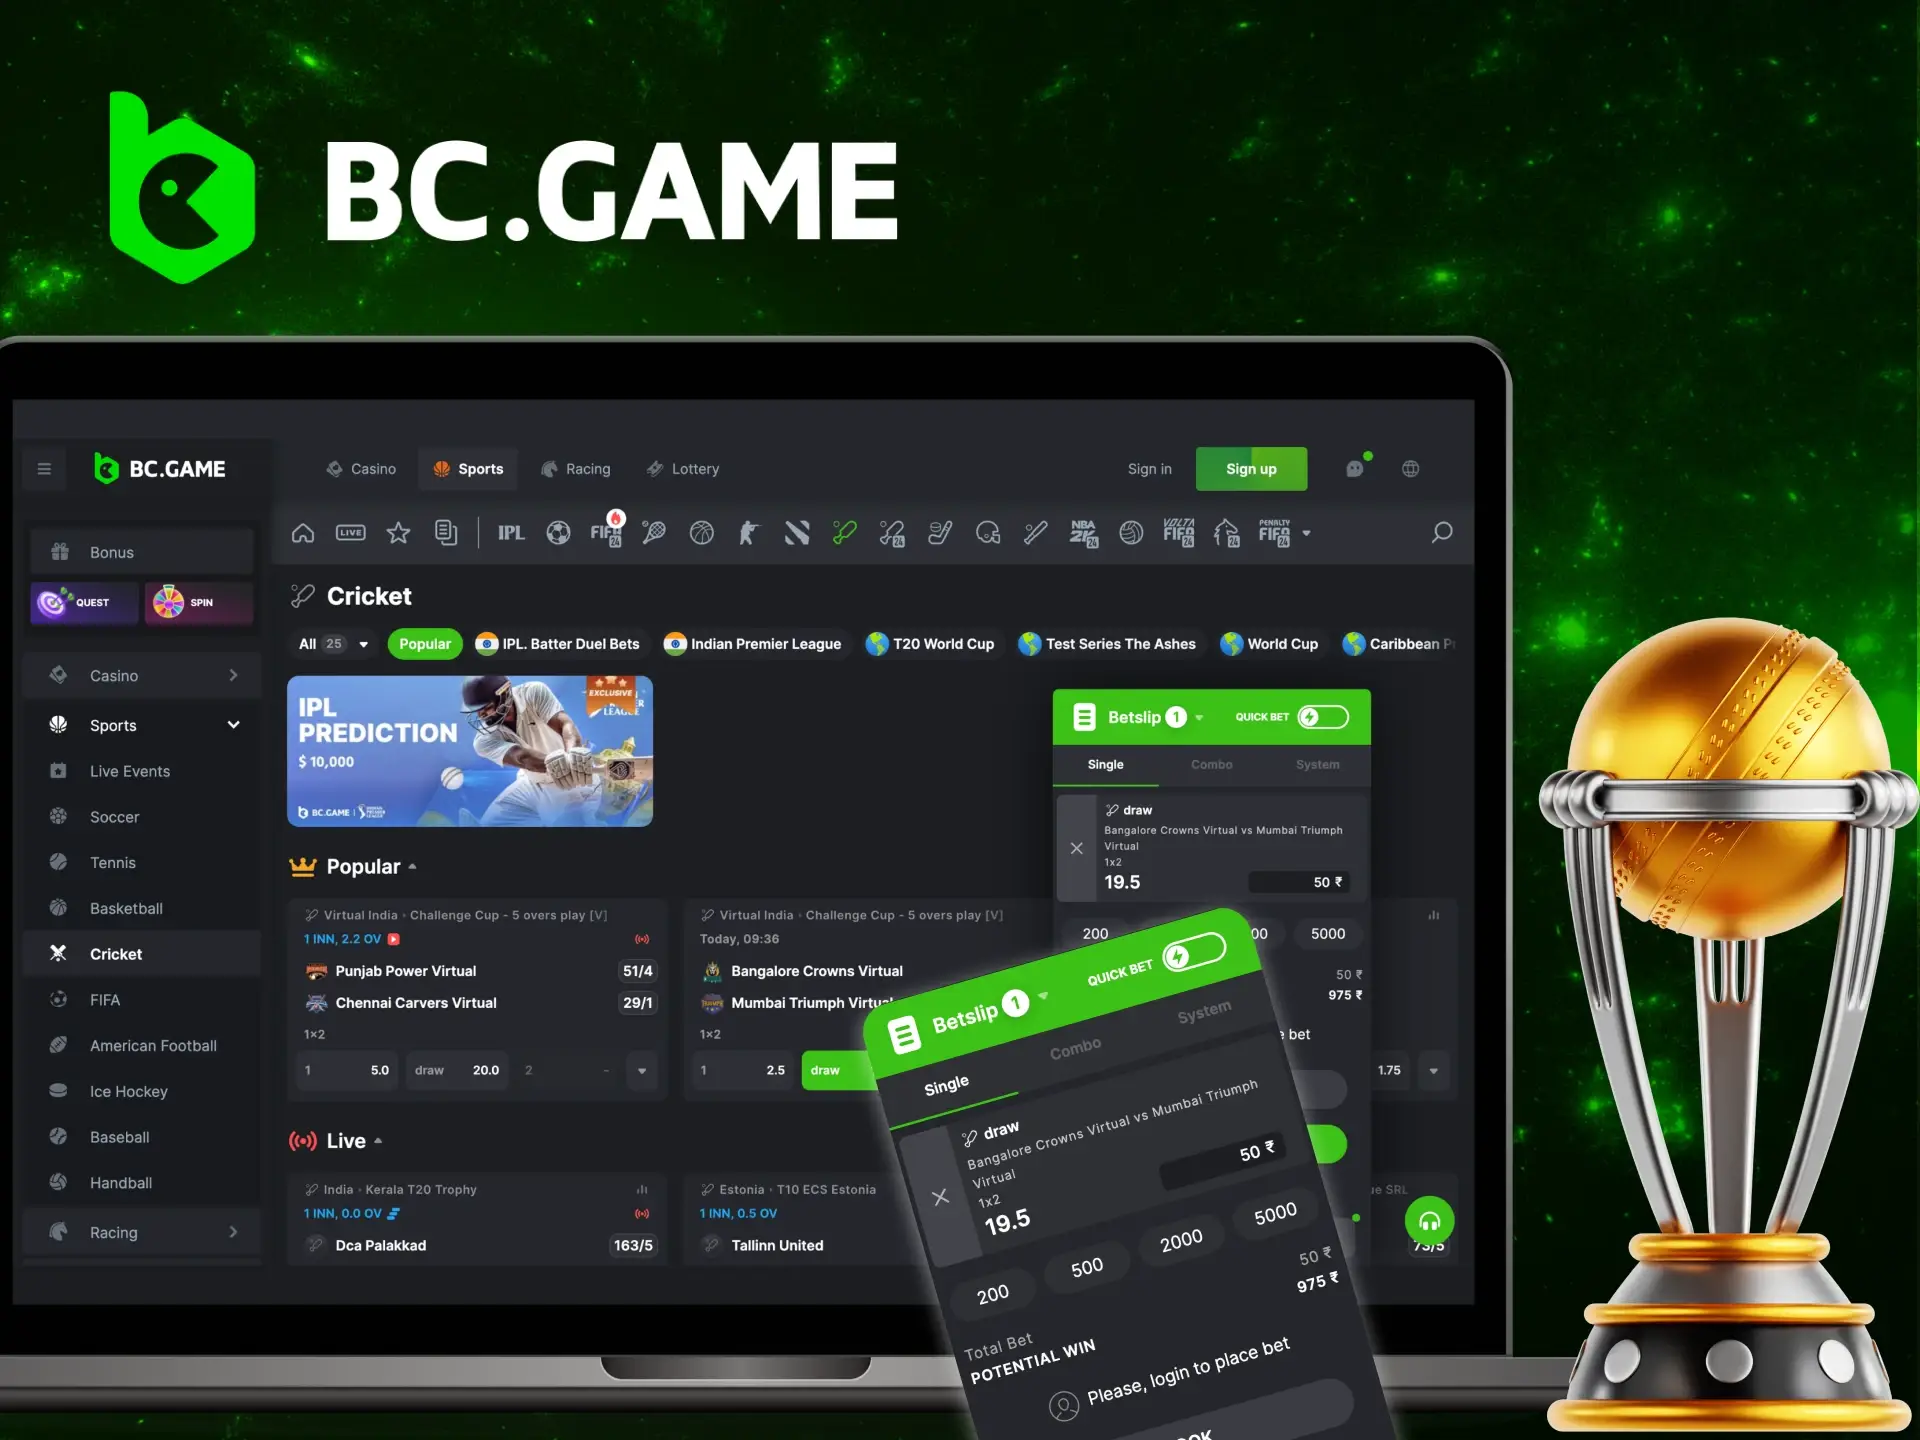 Instructions for users on how to bet on cricket at the BC Game online casino.